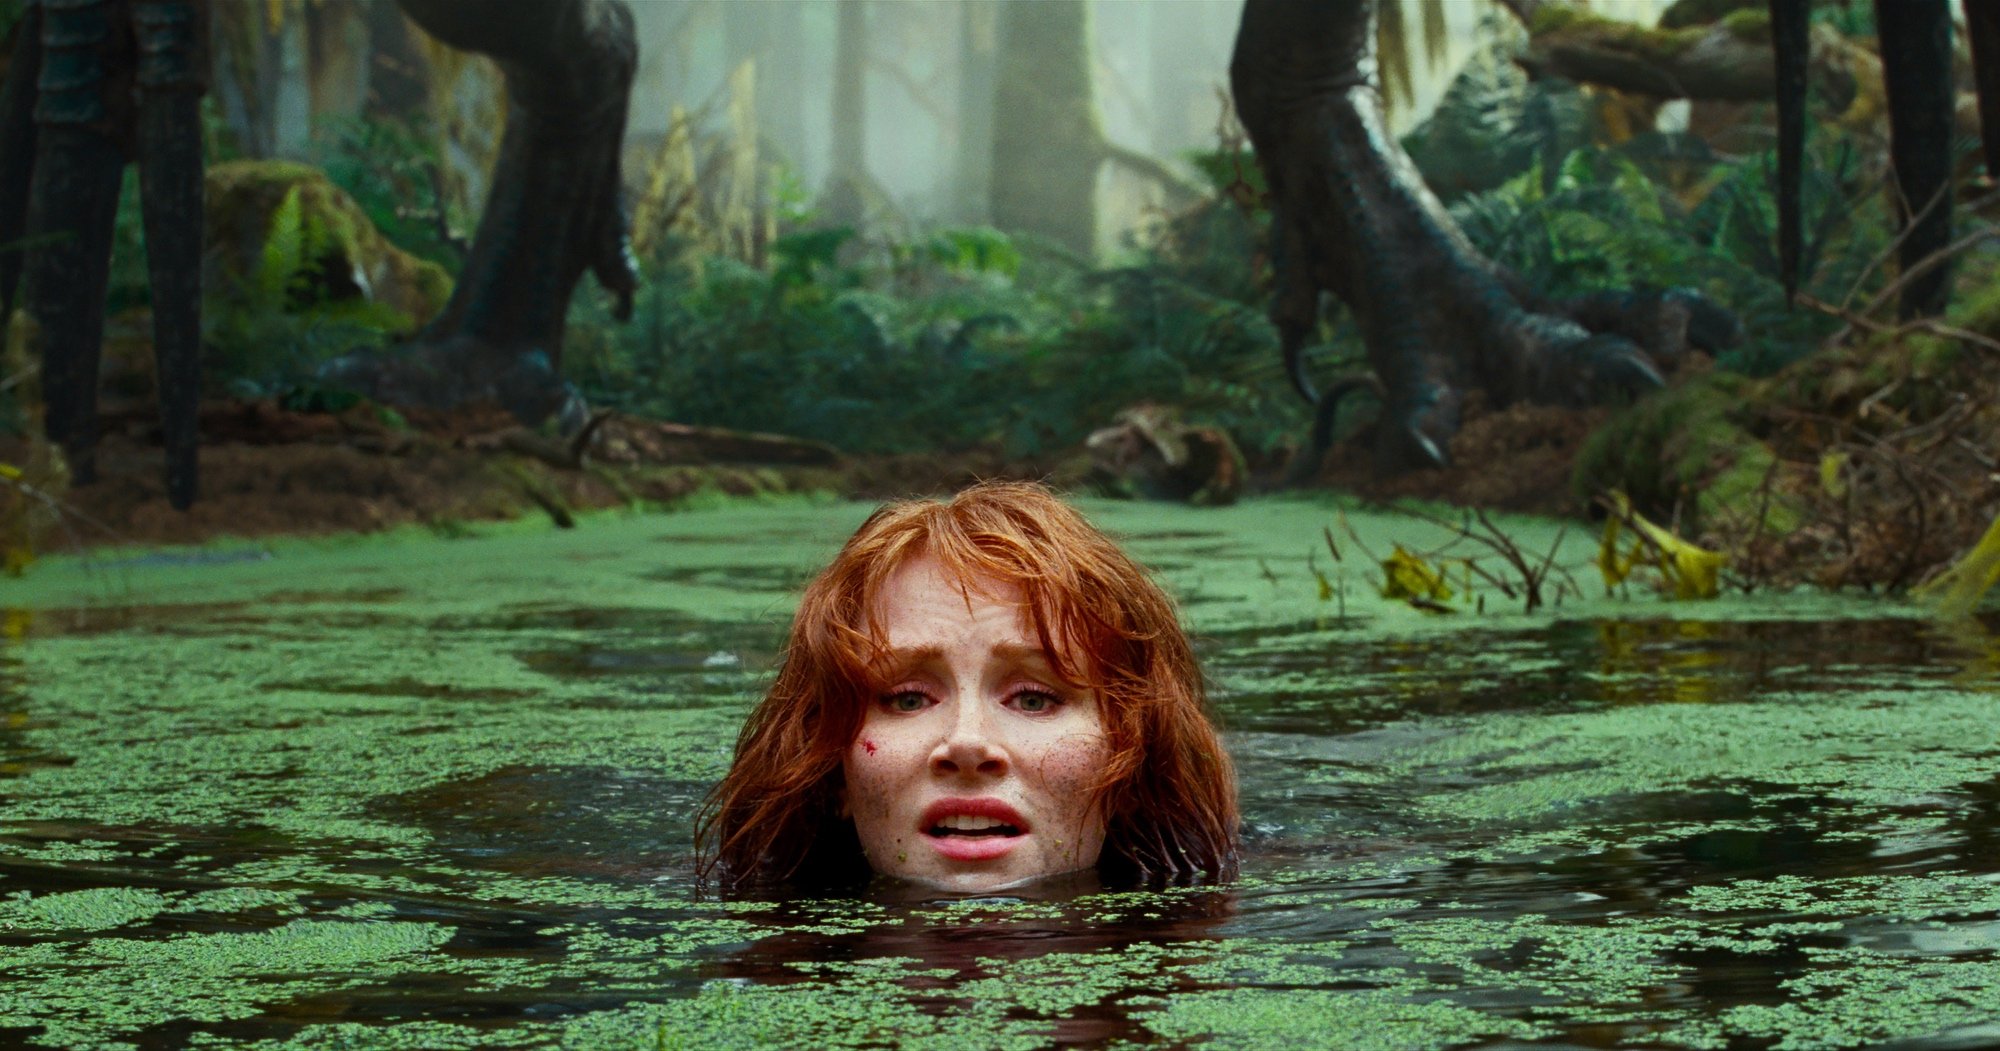 'Jurassic World Dominion' Bryce Dallas Howard as Claire Dearing with her head above water with moss on the surface. A pair of dinosaur legs are standing behind her on the land.